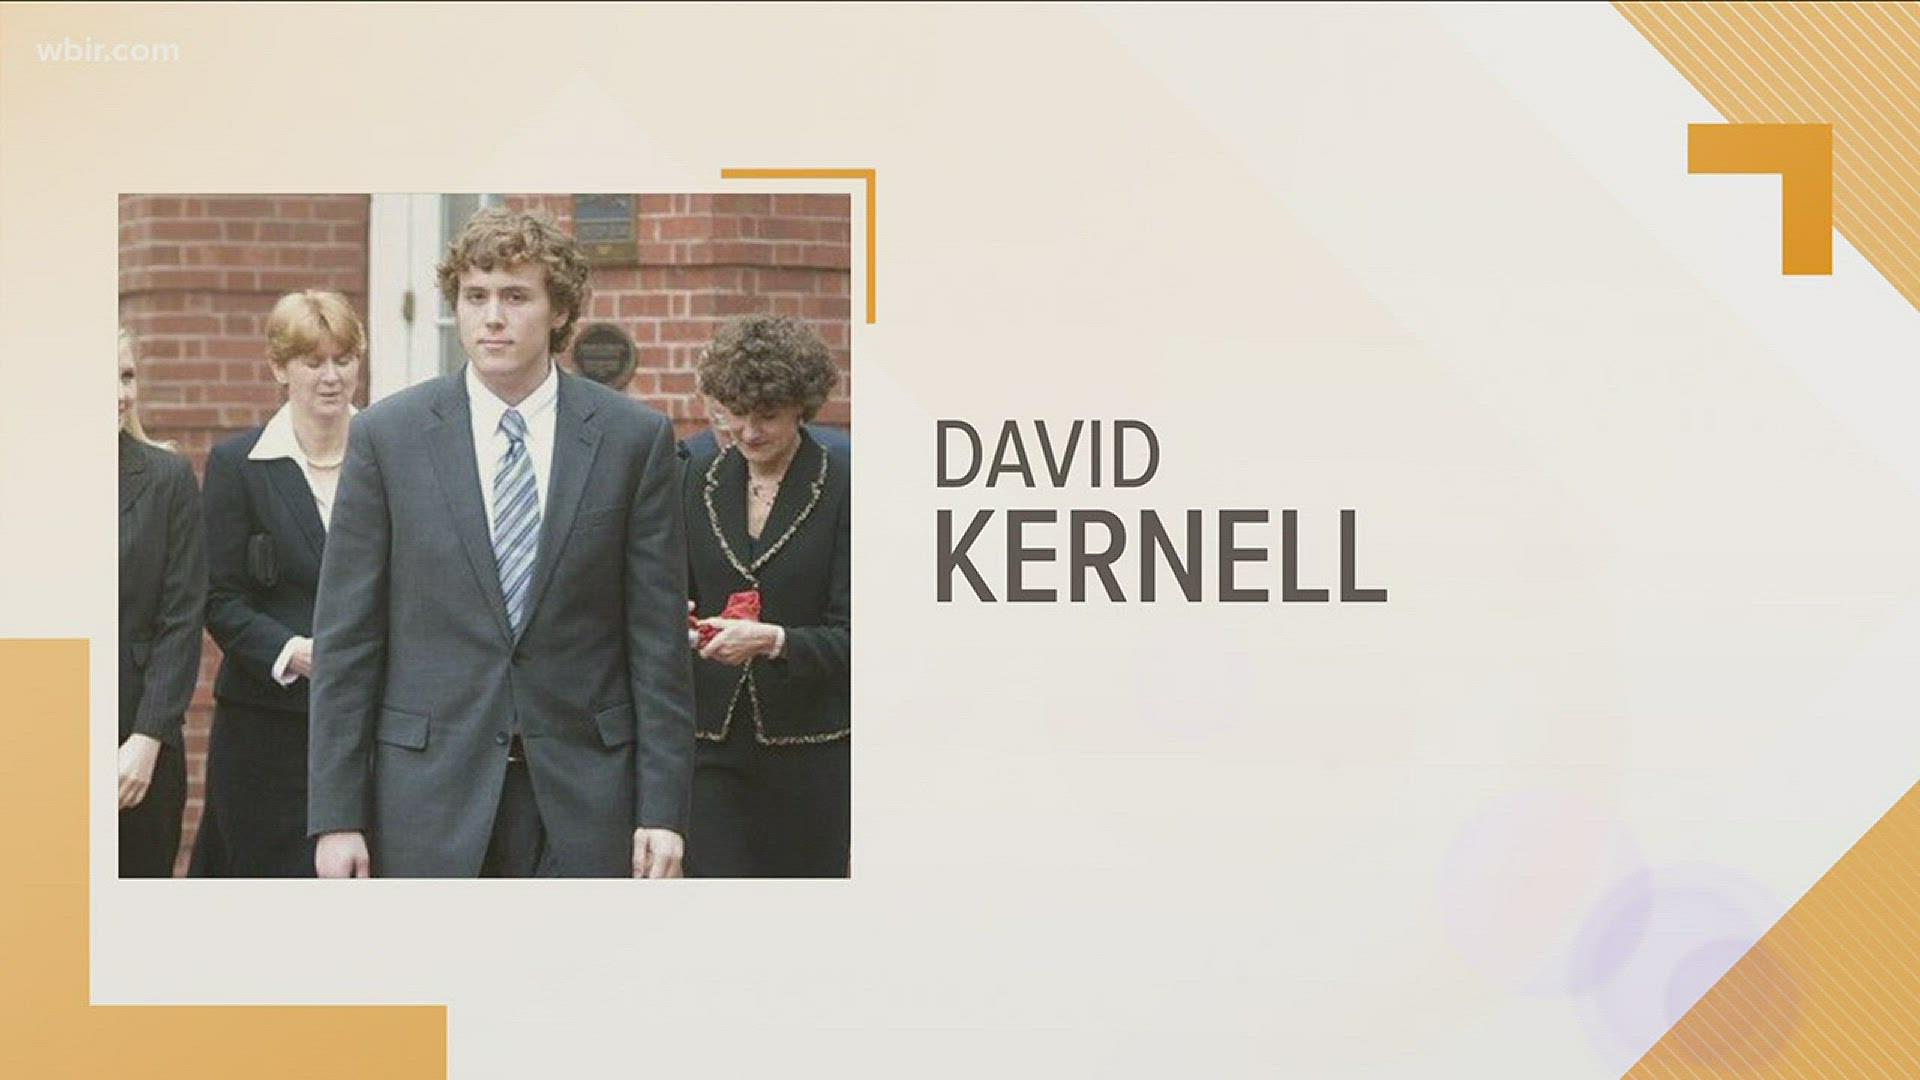 David Kernell was propelled into the national spotlight after he hacked then VP nominee Sarah Palin's Yahoo! email account in 2008.